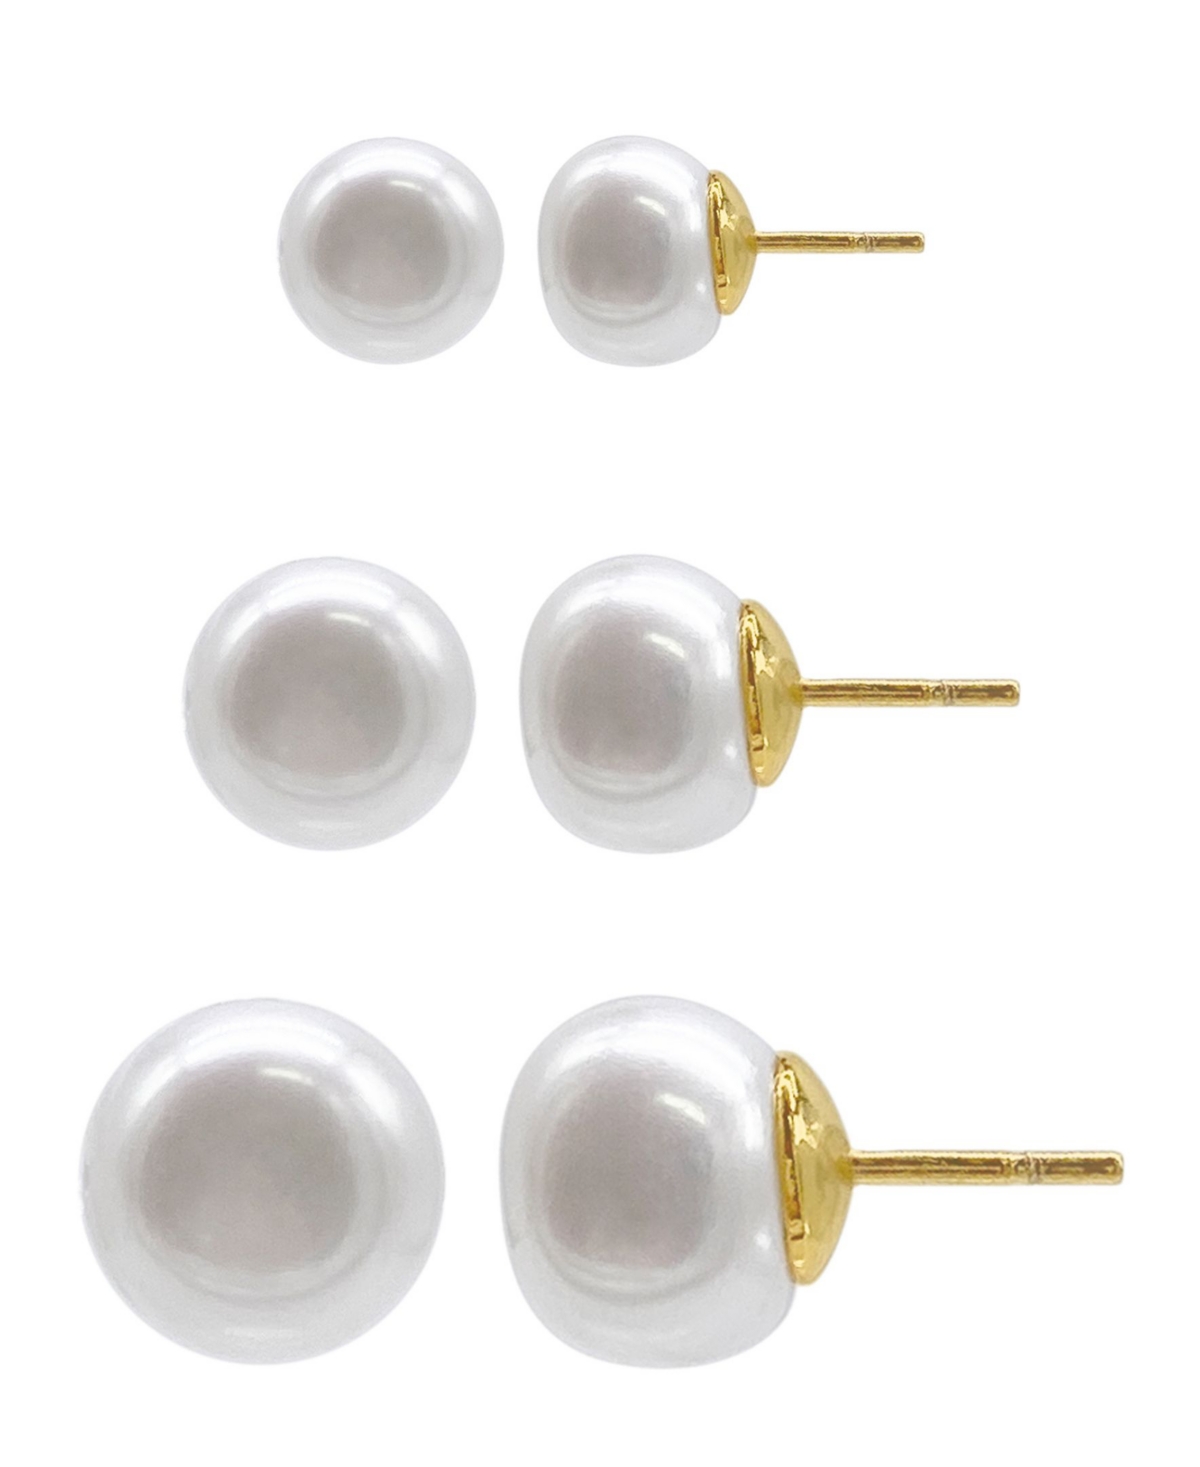 Adornia 14K Gold Plated Freshwater Pearl Stud Earrings Set, 6 Pieces